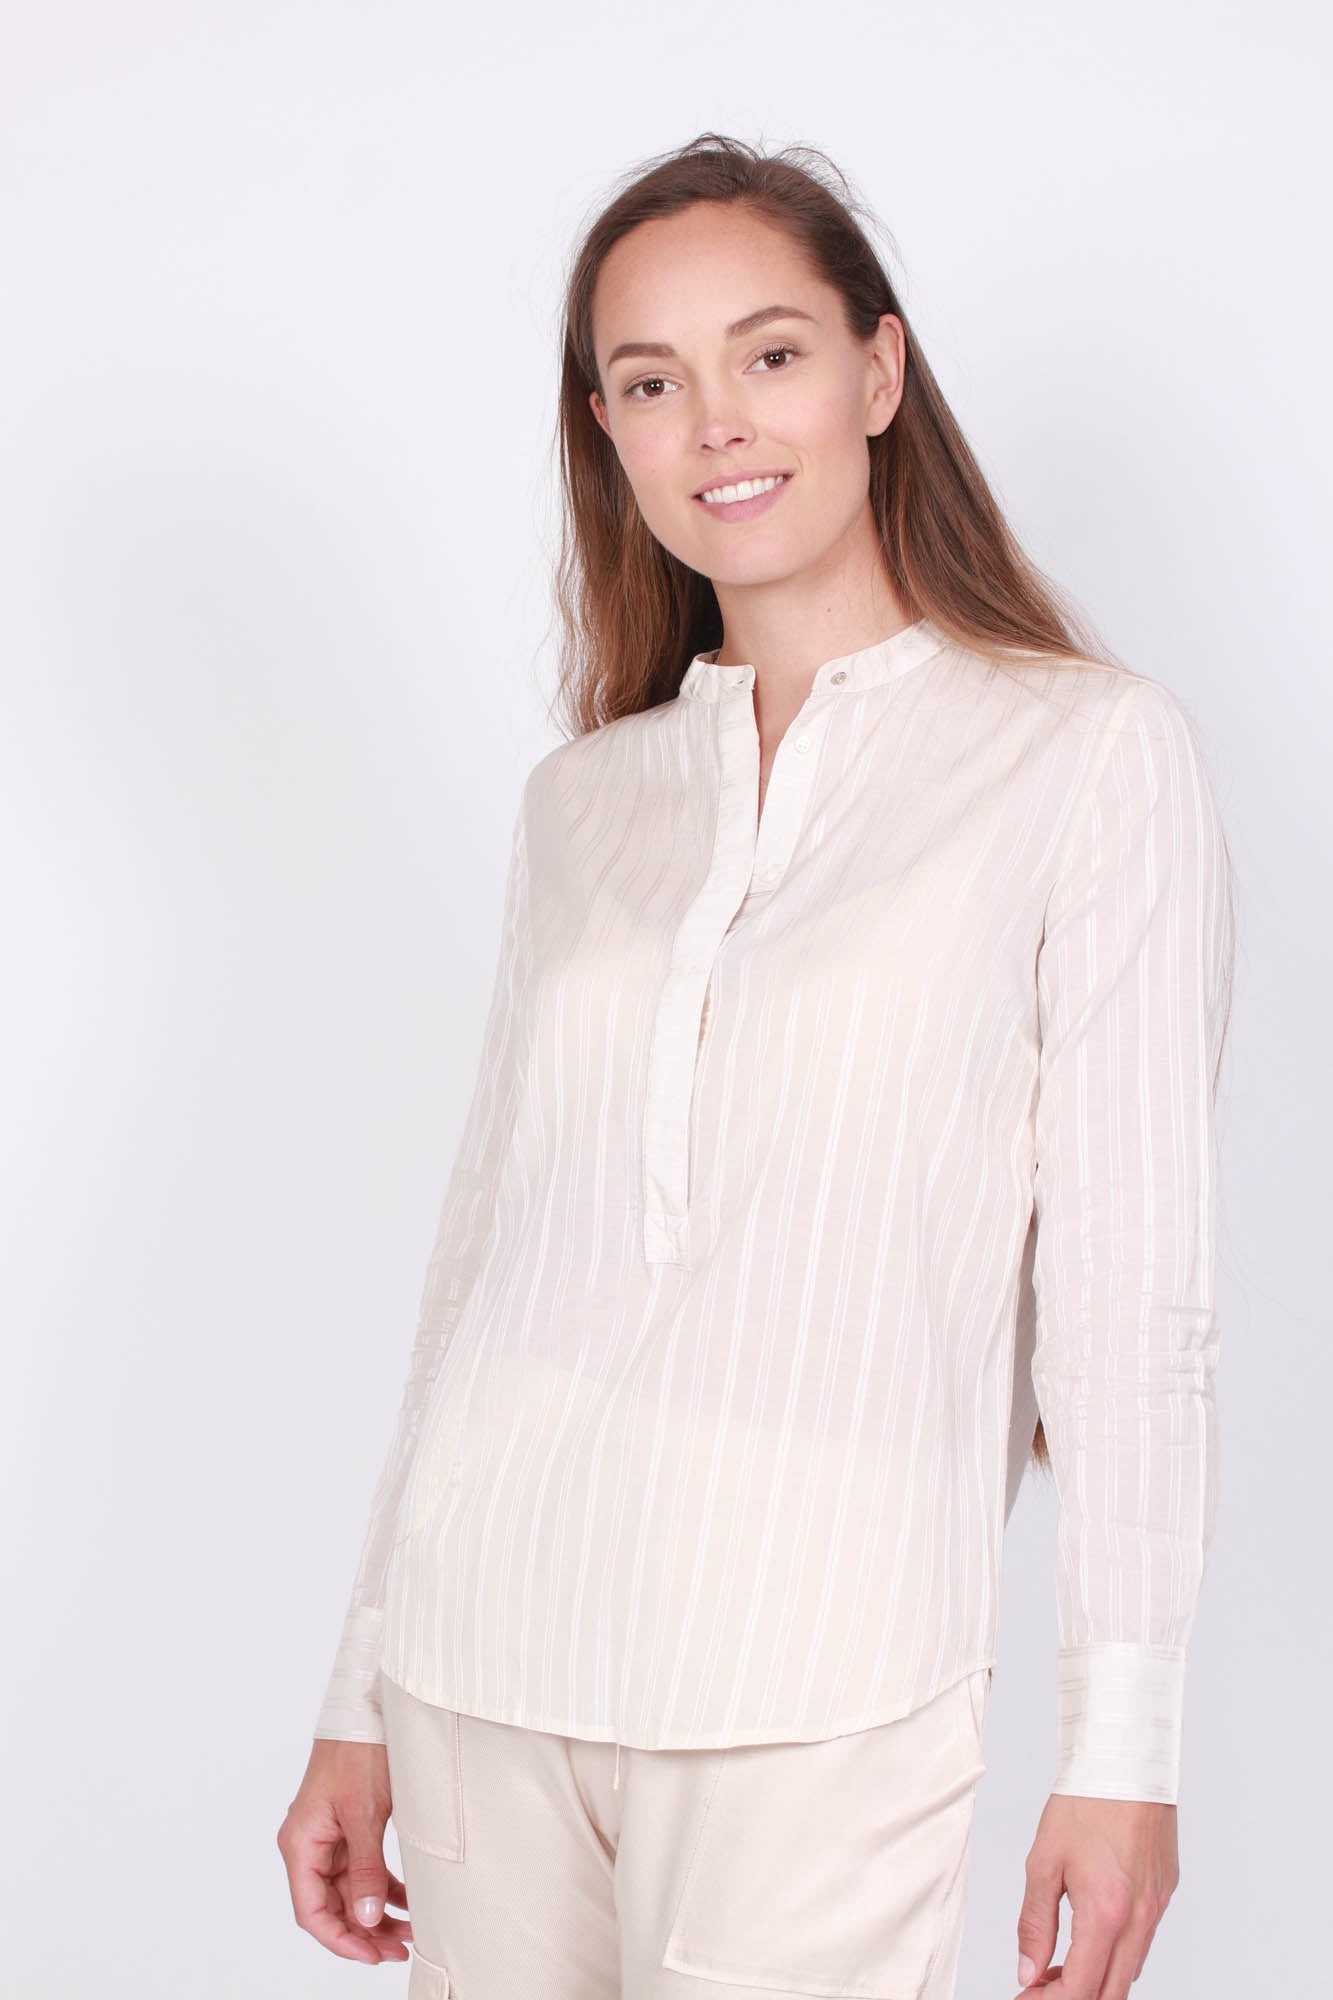 DAY Witty Bluse - Ivory Shade - DAY - Bluser & Skjorter - VILLOID.no